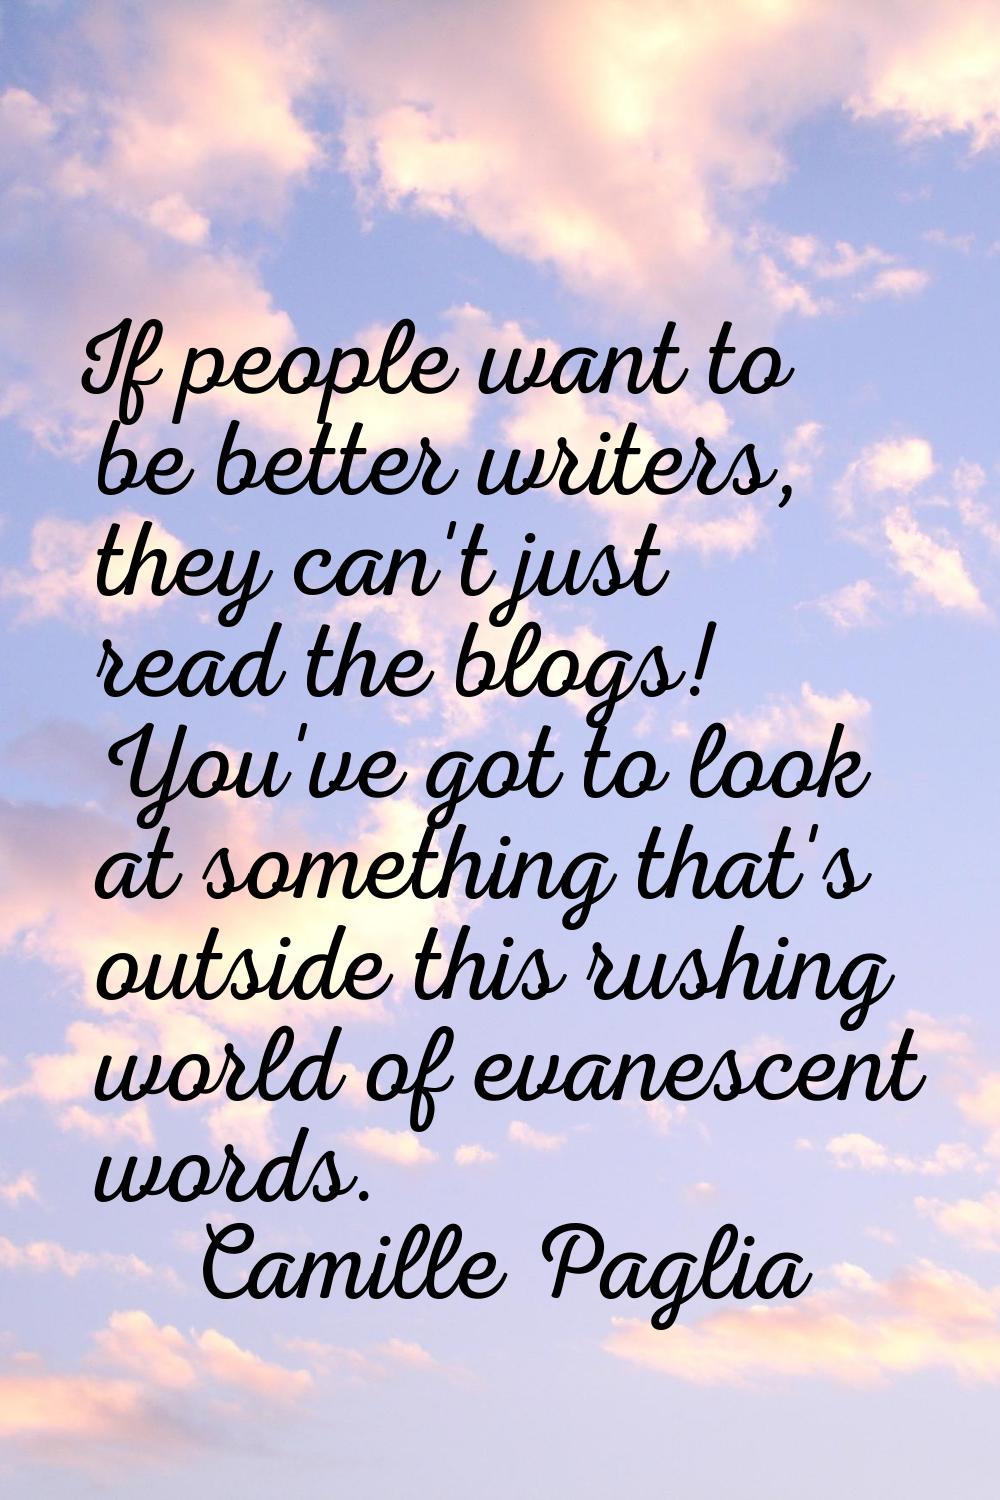 If people want to be better writers, they can't just read the blogs! You've got to look at somethin